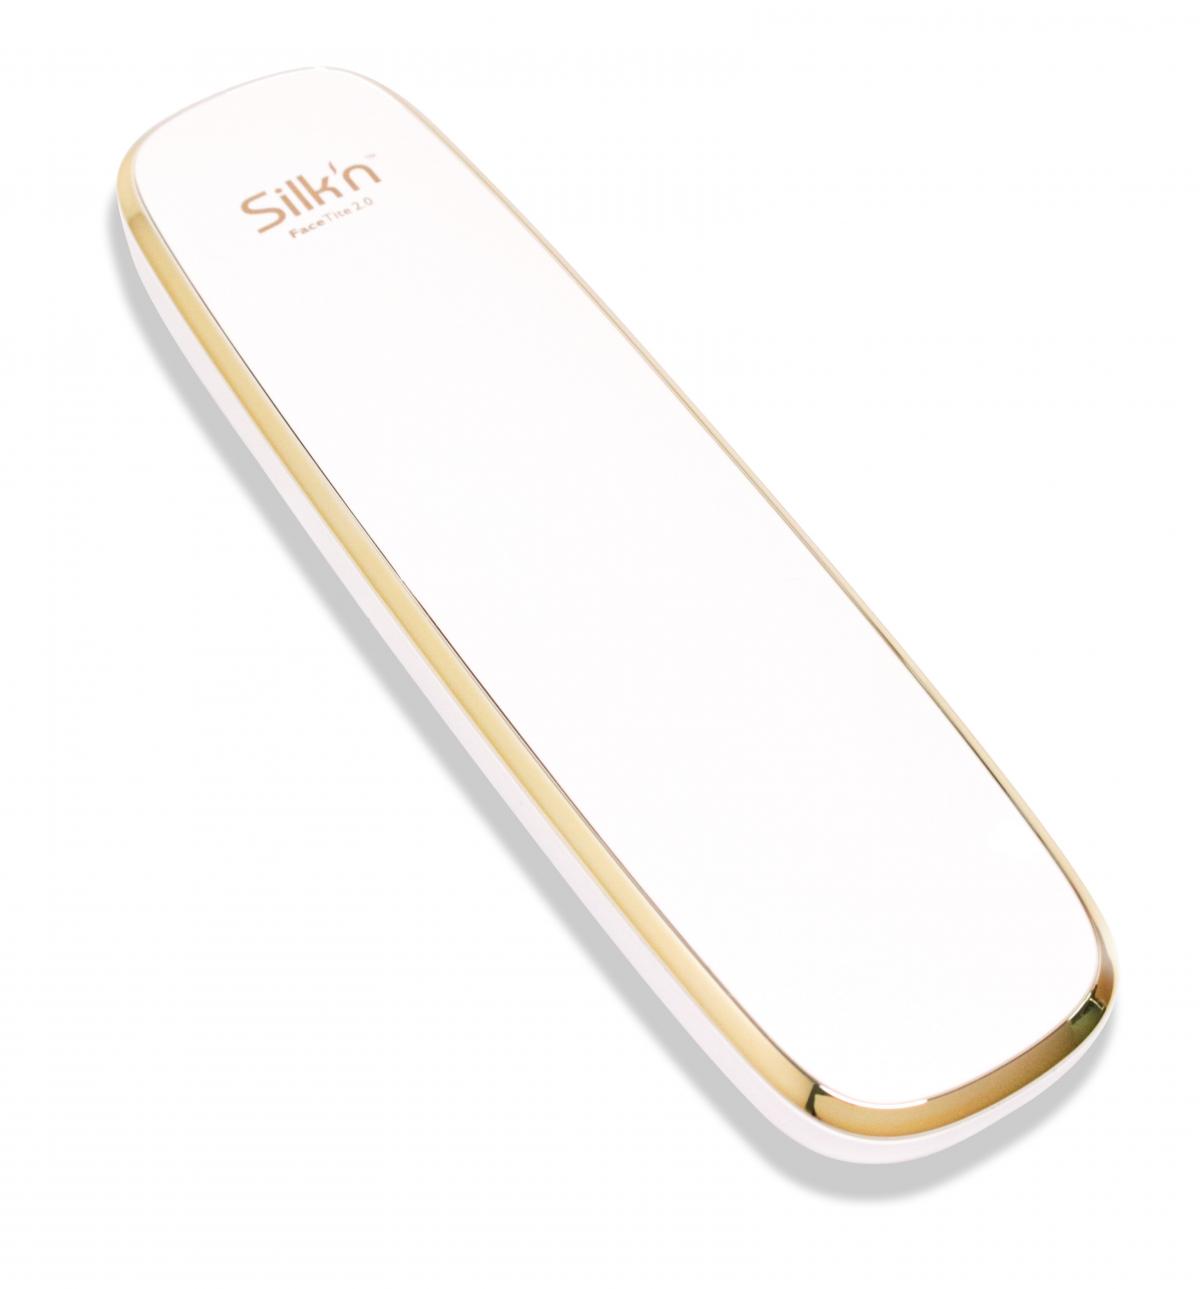 Silk'n | Silkn FaceTite 2.0 Anti-aging Face Treatment Device（With one  preparation gel) | HKTVmall The Largest HK Shopping Platform